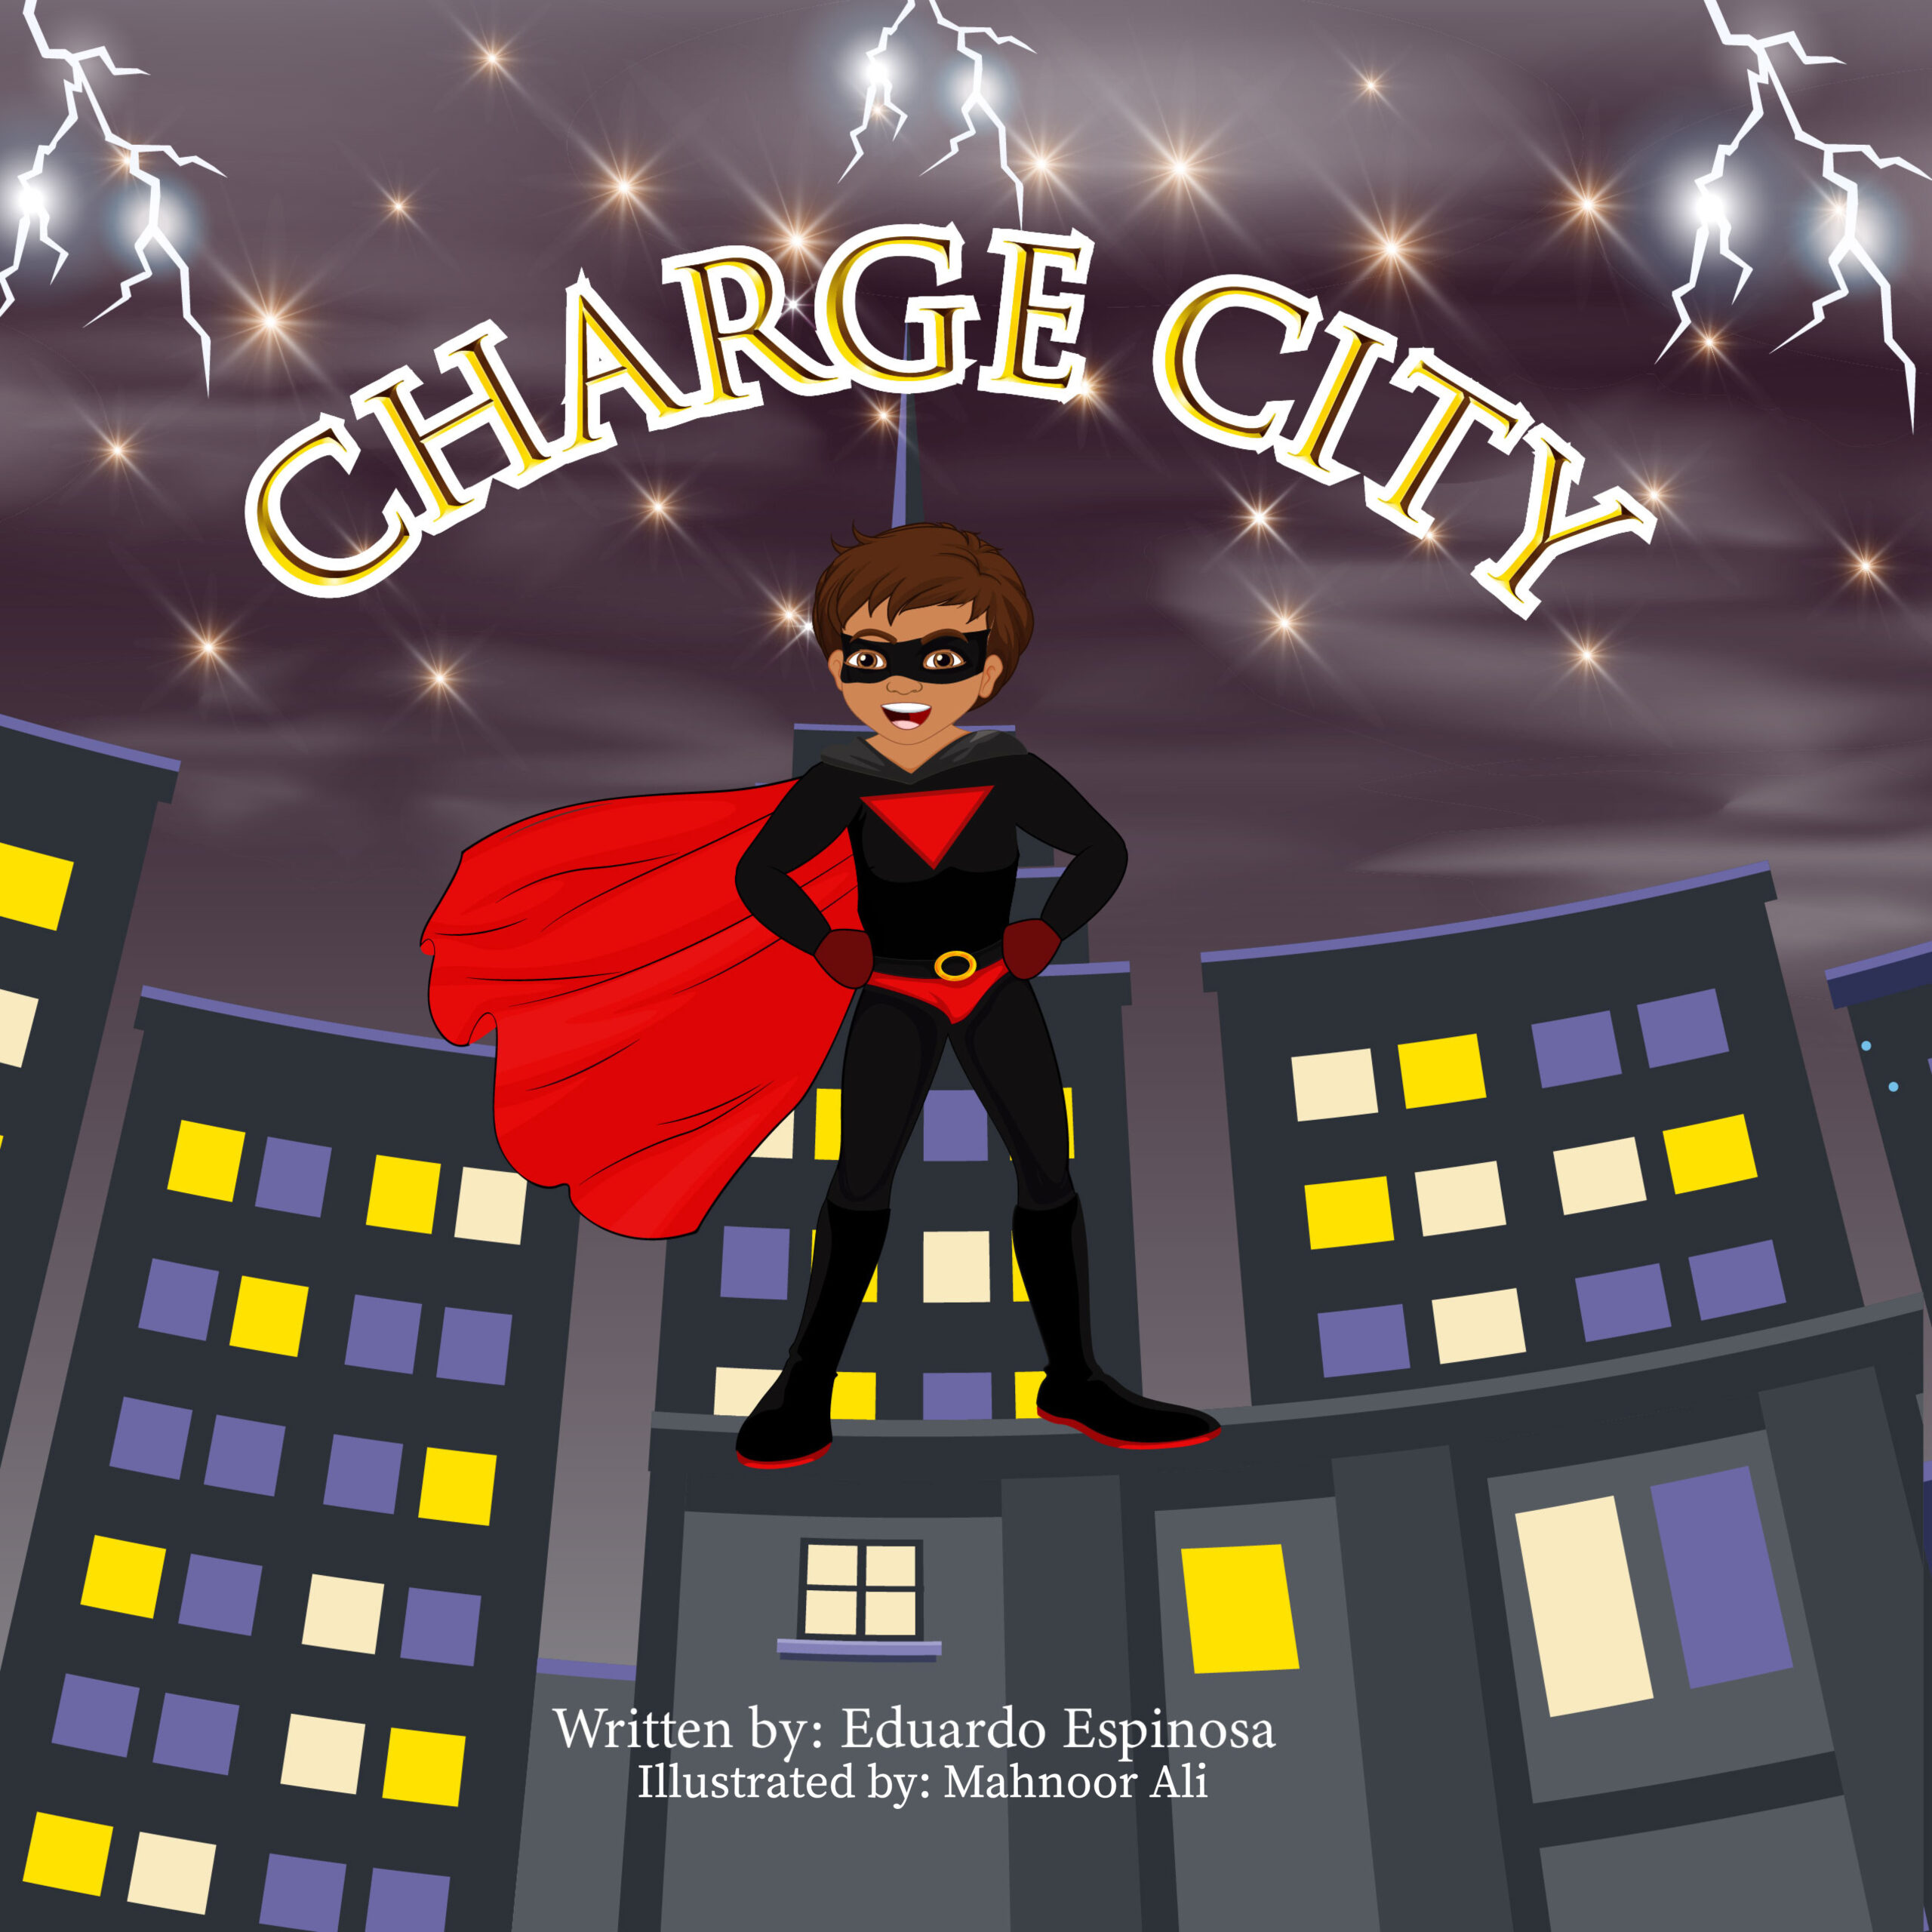 Book Cover for Charge City, written by Eduardo Espinosa and illustrated by Mahnoor Ali. The cover features a superhero dressed in a black and red suit, mask, and cape. He is flying in front of the nighttime city skyline, and stars and lighting light the sky.